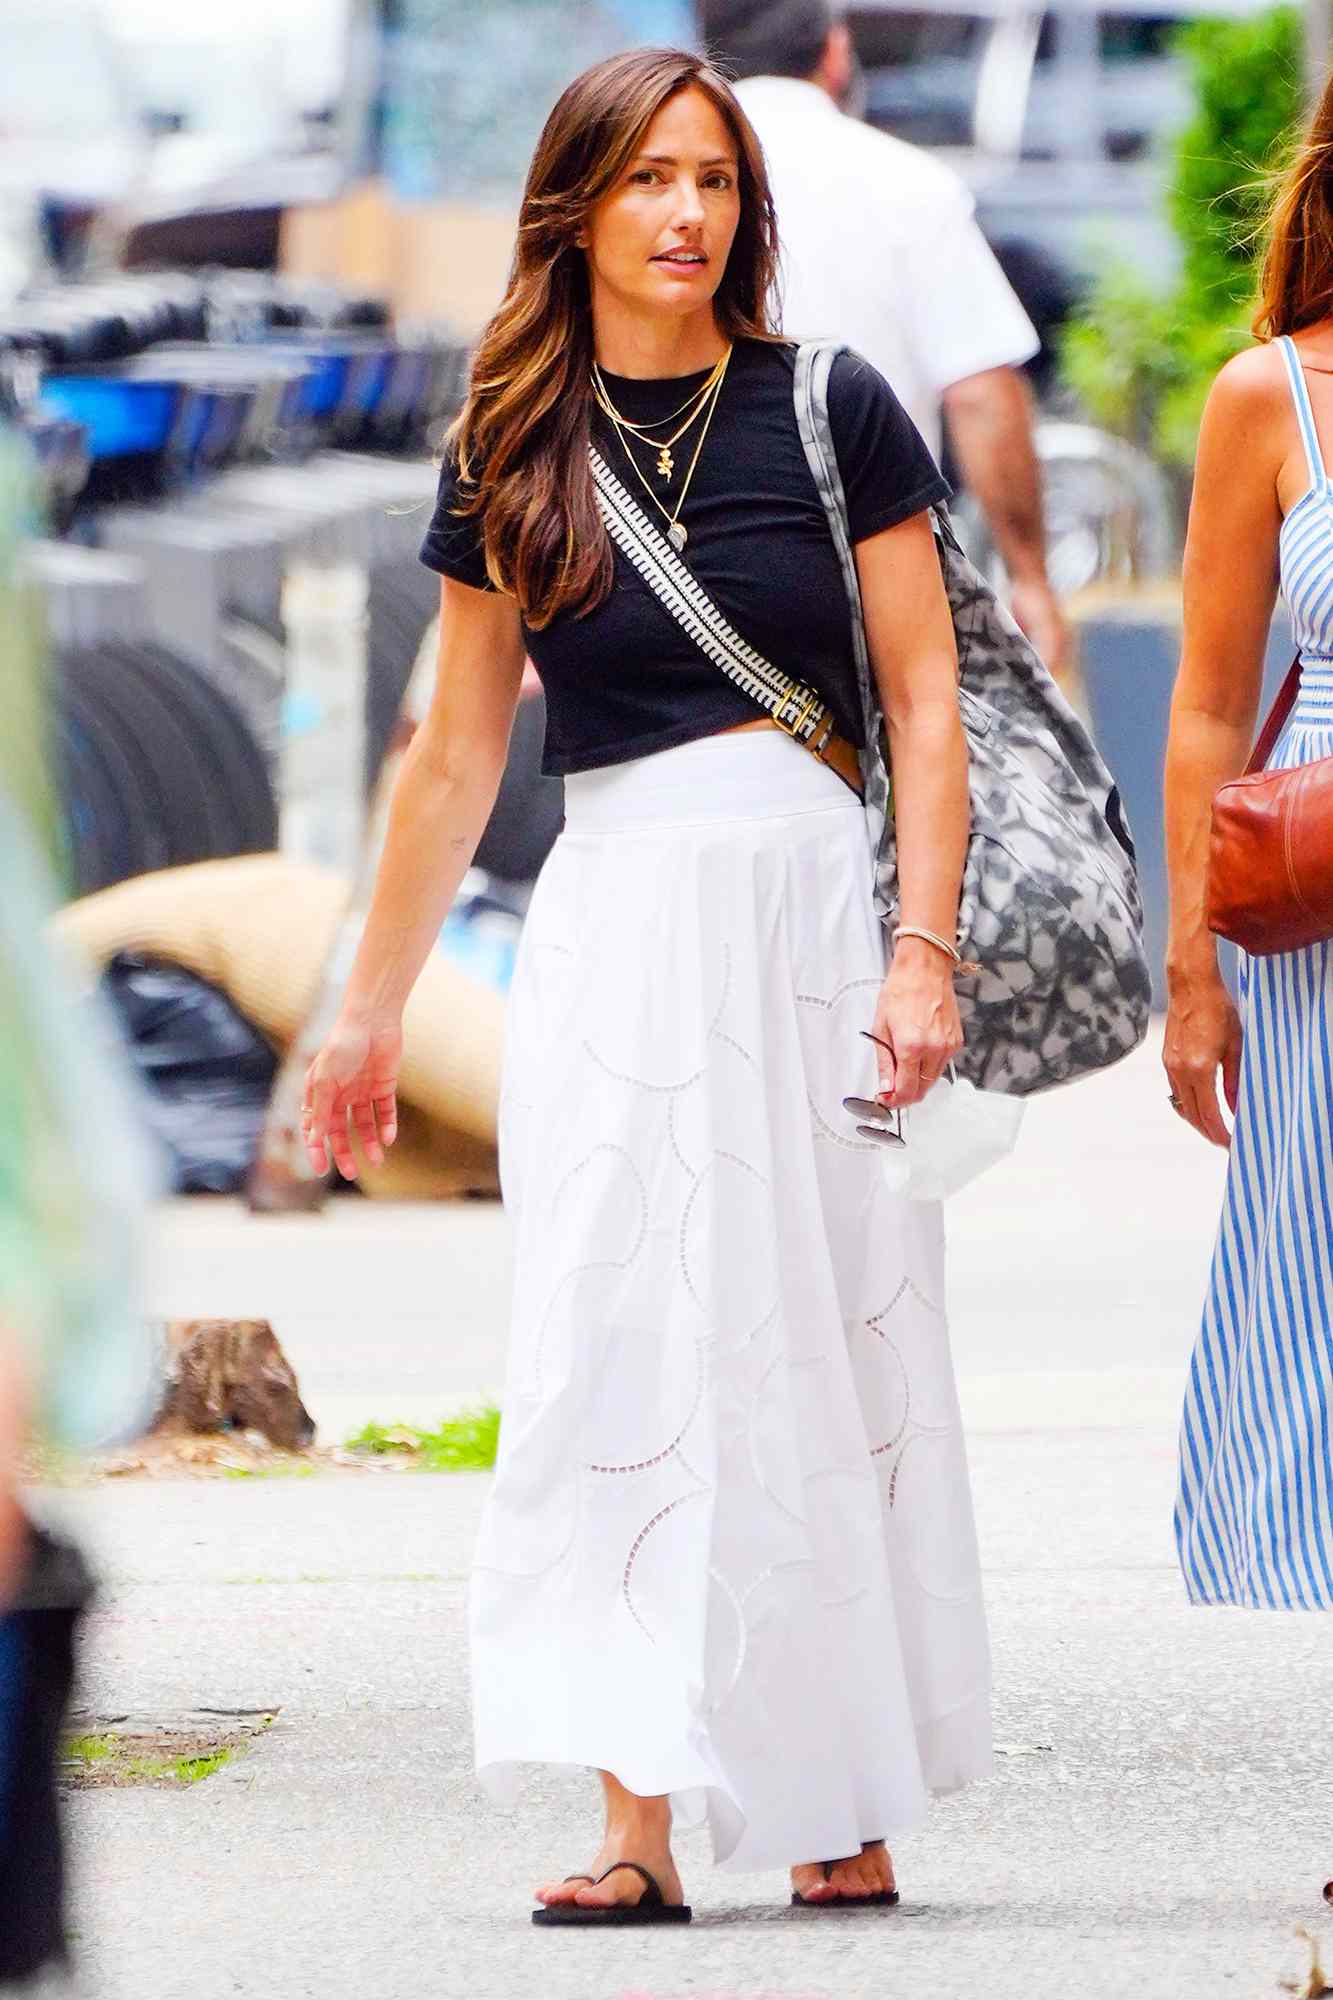 Minka Kelly is Pictured out in New York City After Being Photographed With Trevor Noah.